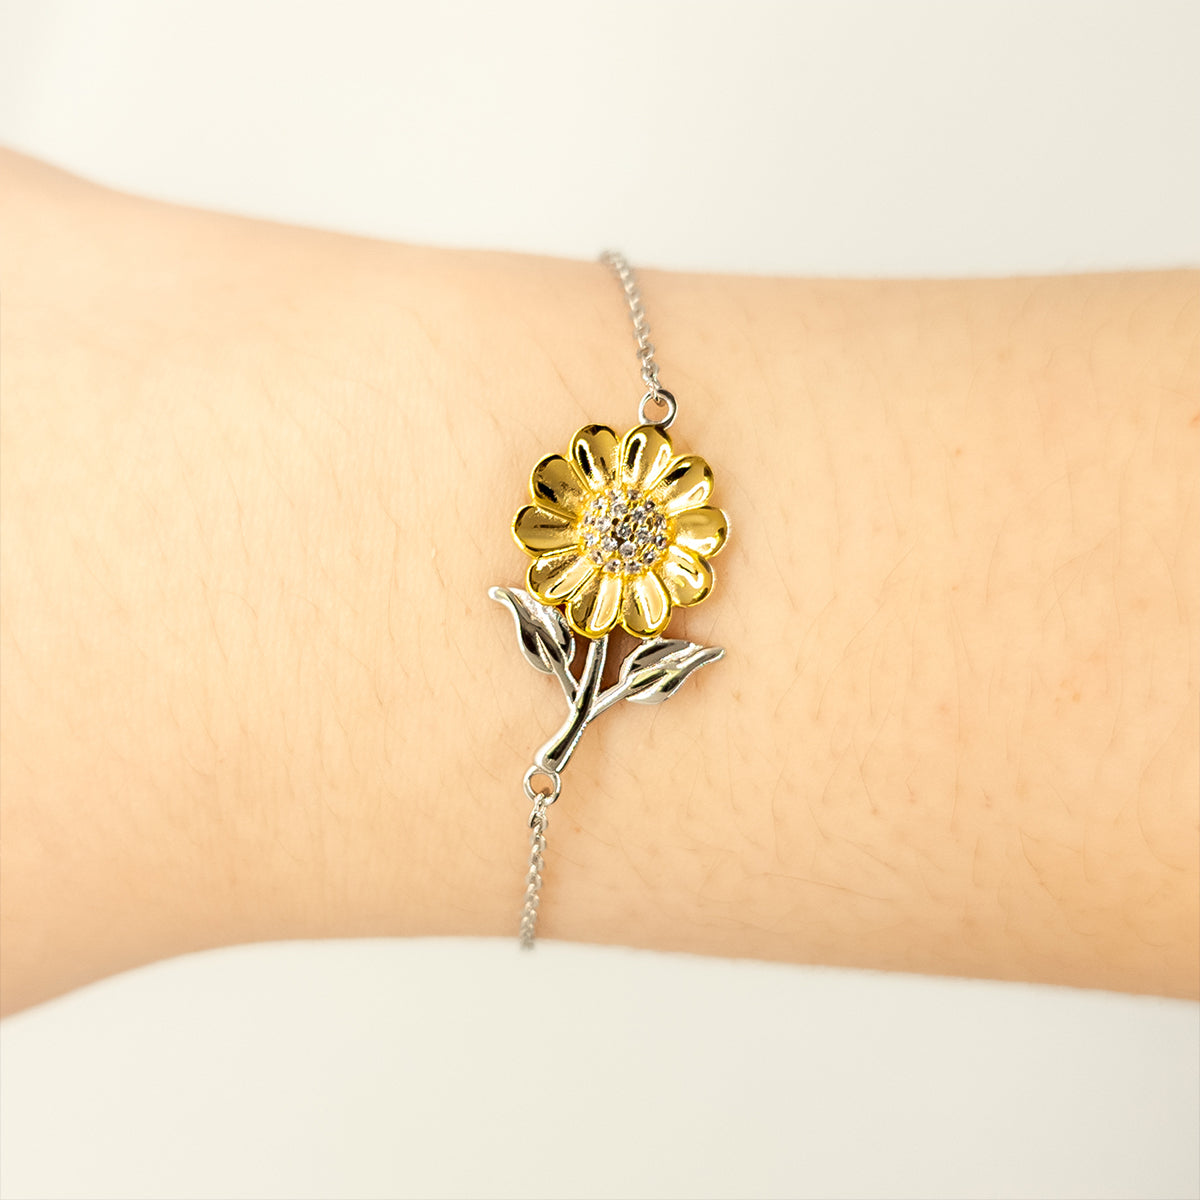 Grand Daddy Sunflower Bracelet - Engraved Memorial Gift for Him on Birthday or Christmas - Special Place in My Heart, Always